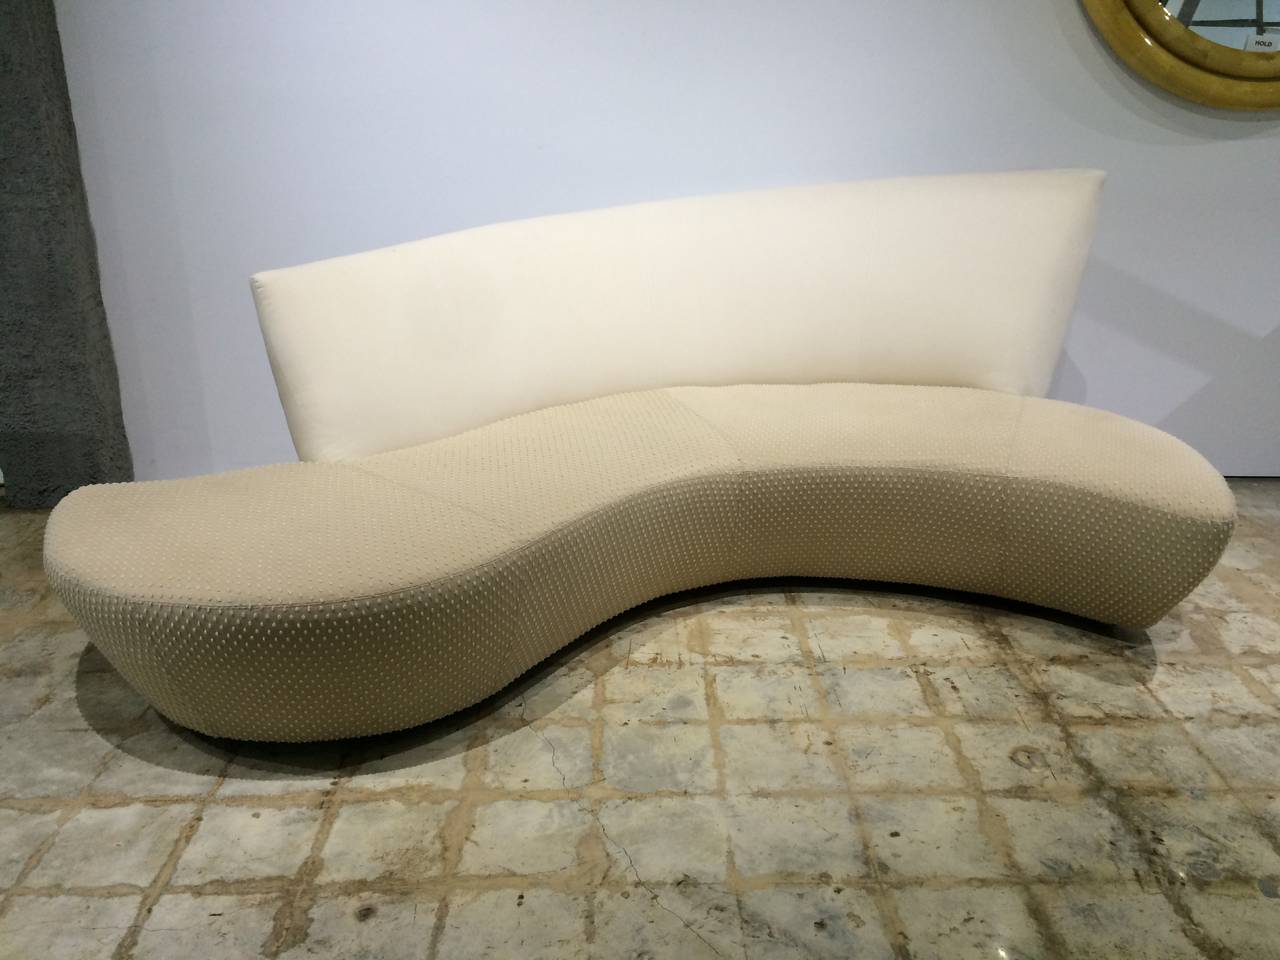 Sculptural sofa in two-tone fabric combination of a beige and ivory dotted-swiss seat and ivory ultra suede back, designed by Vladimir Kagan who was inspired by Frank Gehry's Guggenheim Museum in Bilbao, Spain.

Sofa is upholstered in midnight blue